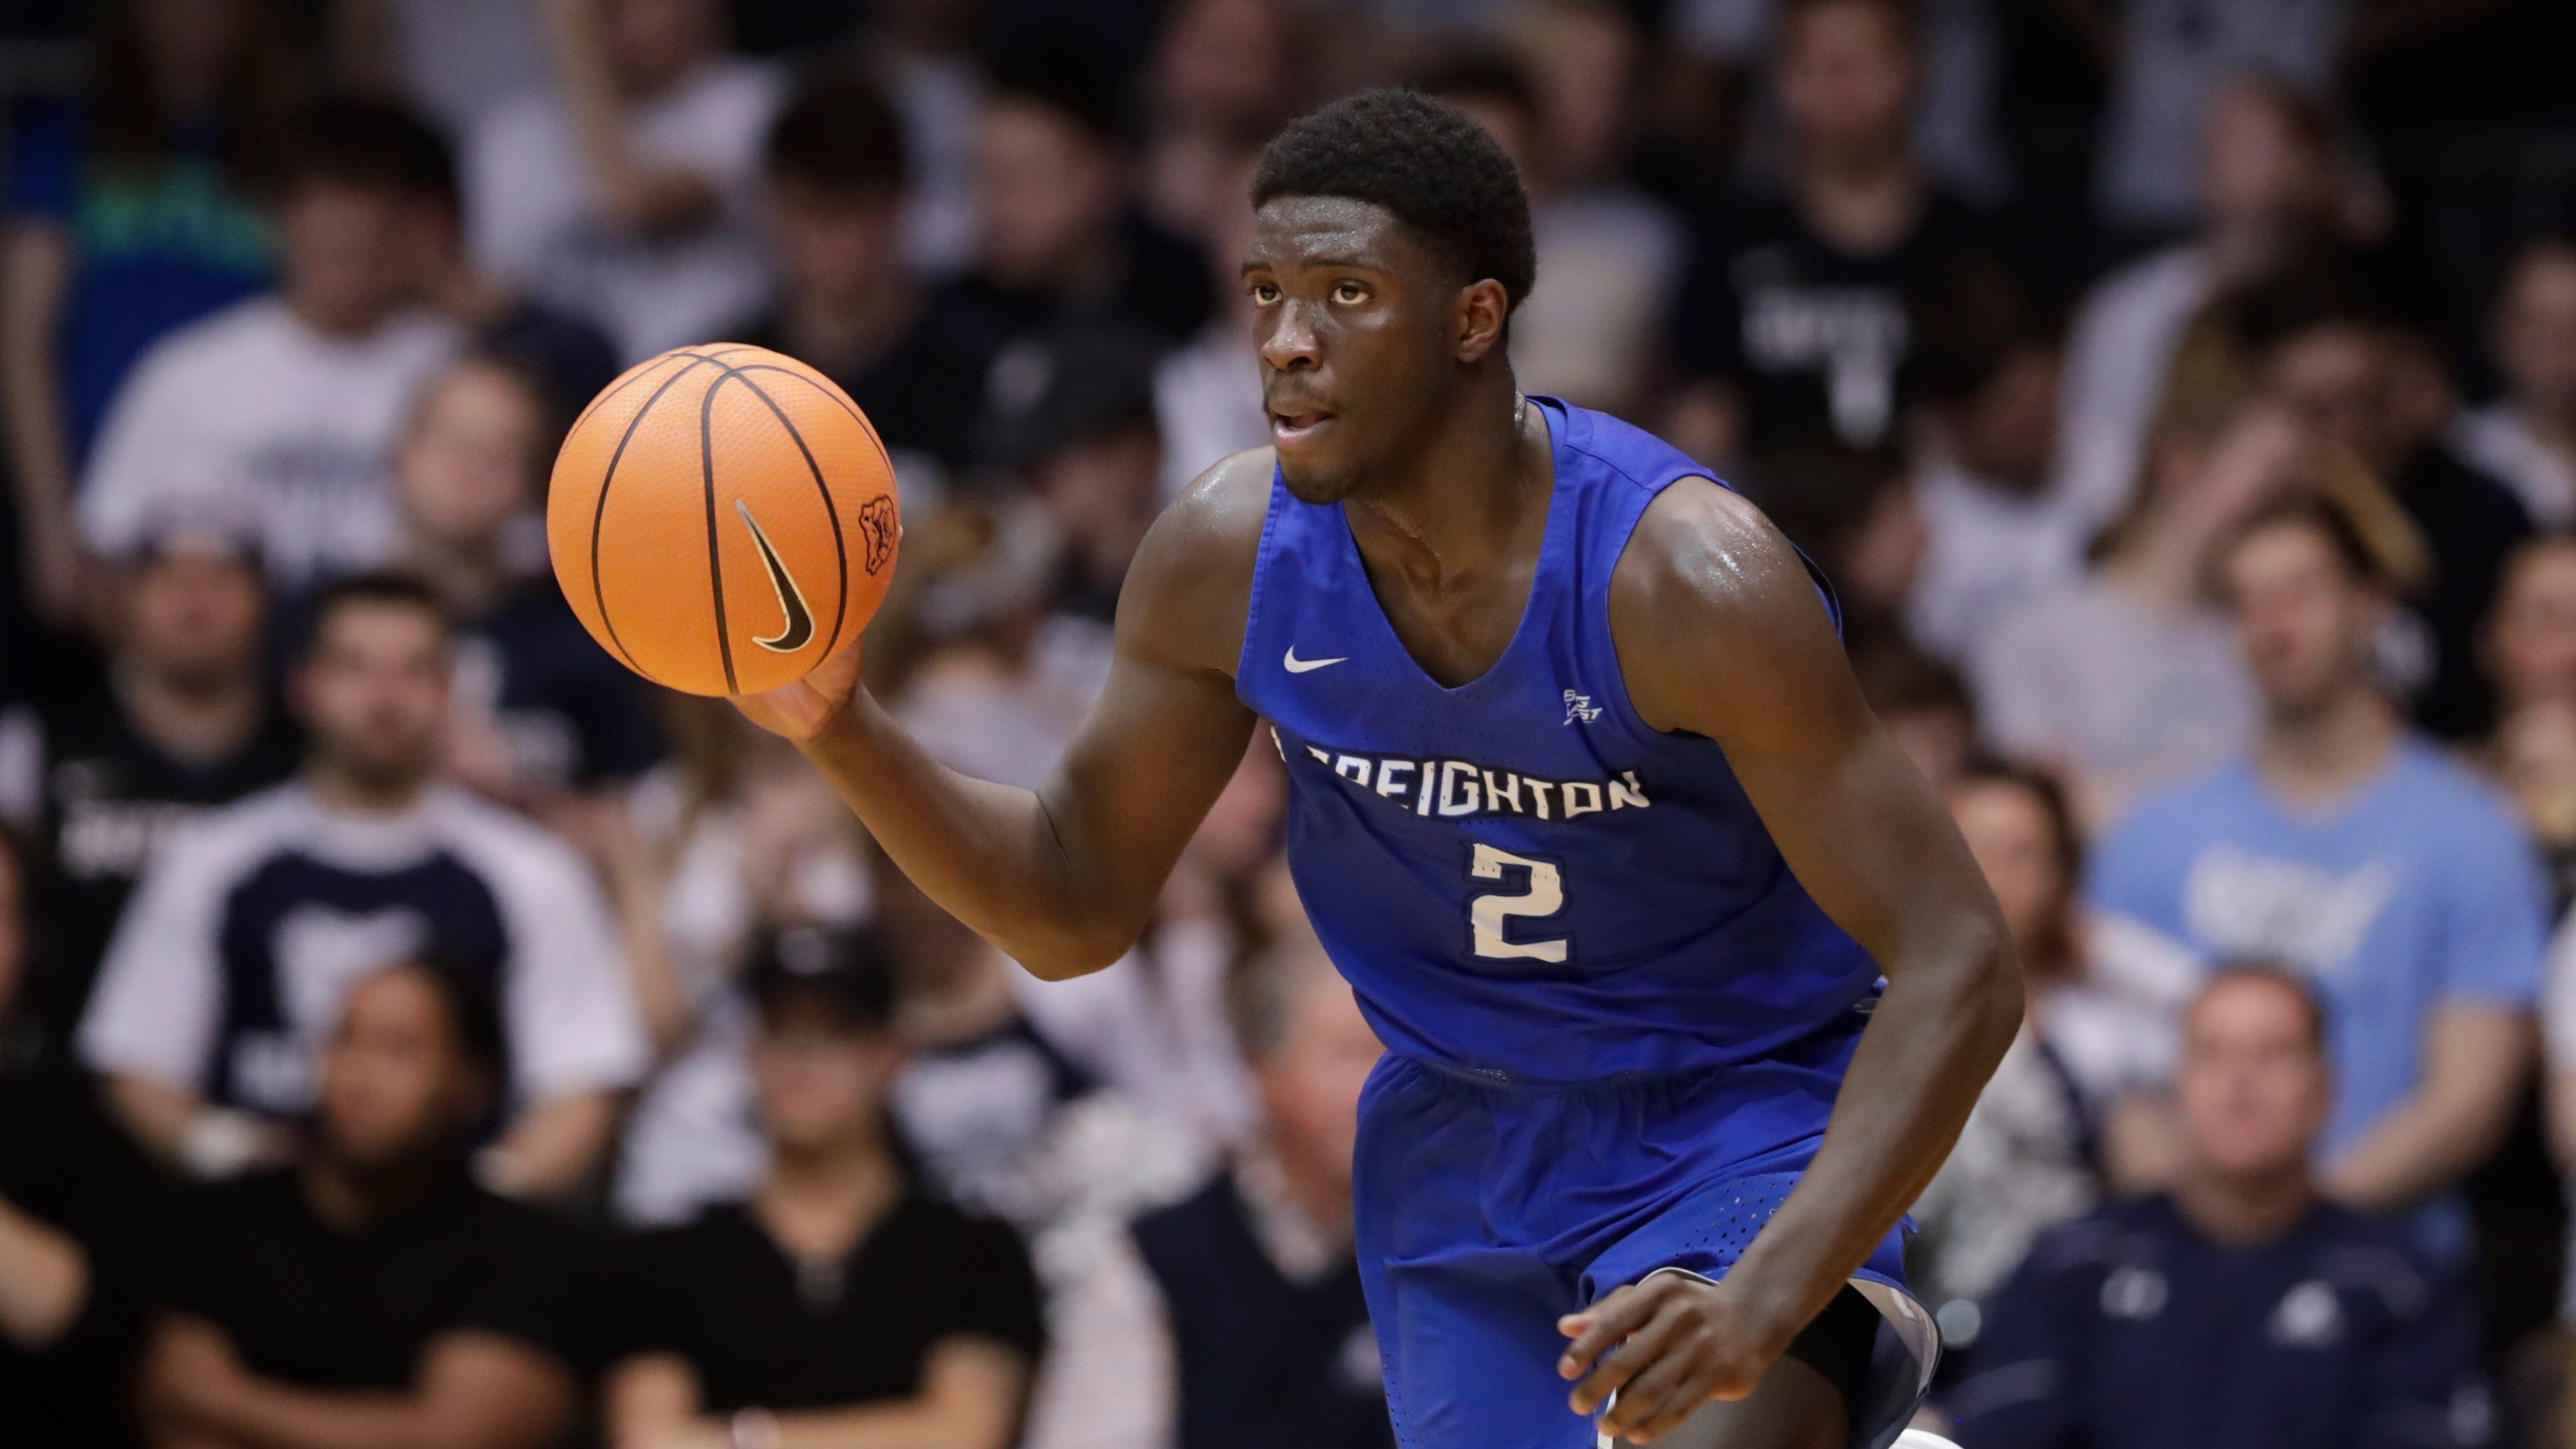 12. Khyri Thomas, G: He showed in the Las Vegas Summer League that he could be an asset as a dogged defender and a pretty good shooter. The Pistons ideally wouldn’t have to play him much this season with their roster depth, but there’s plenty to like in his game. Being on a rookie deal is the biggest value, as it'll develop and balance out the Pistons’ big contracts.